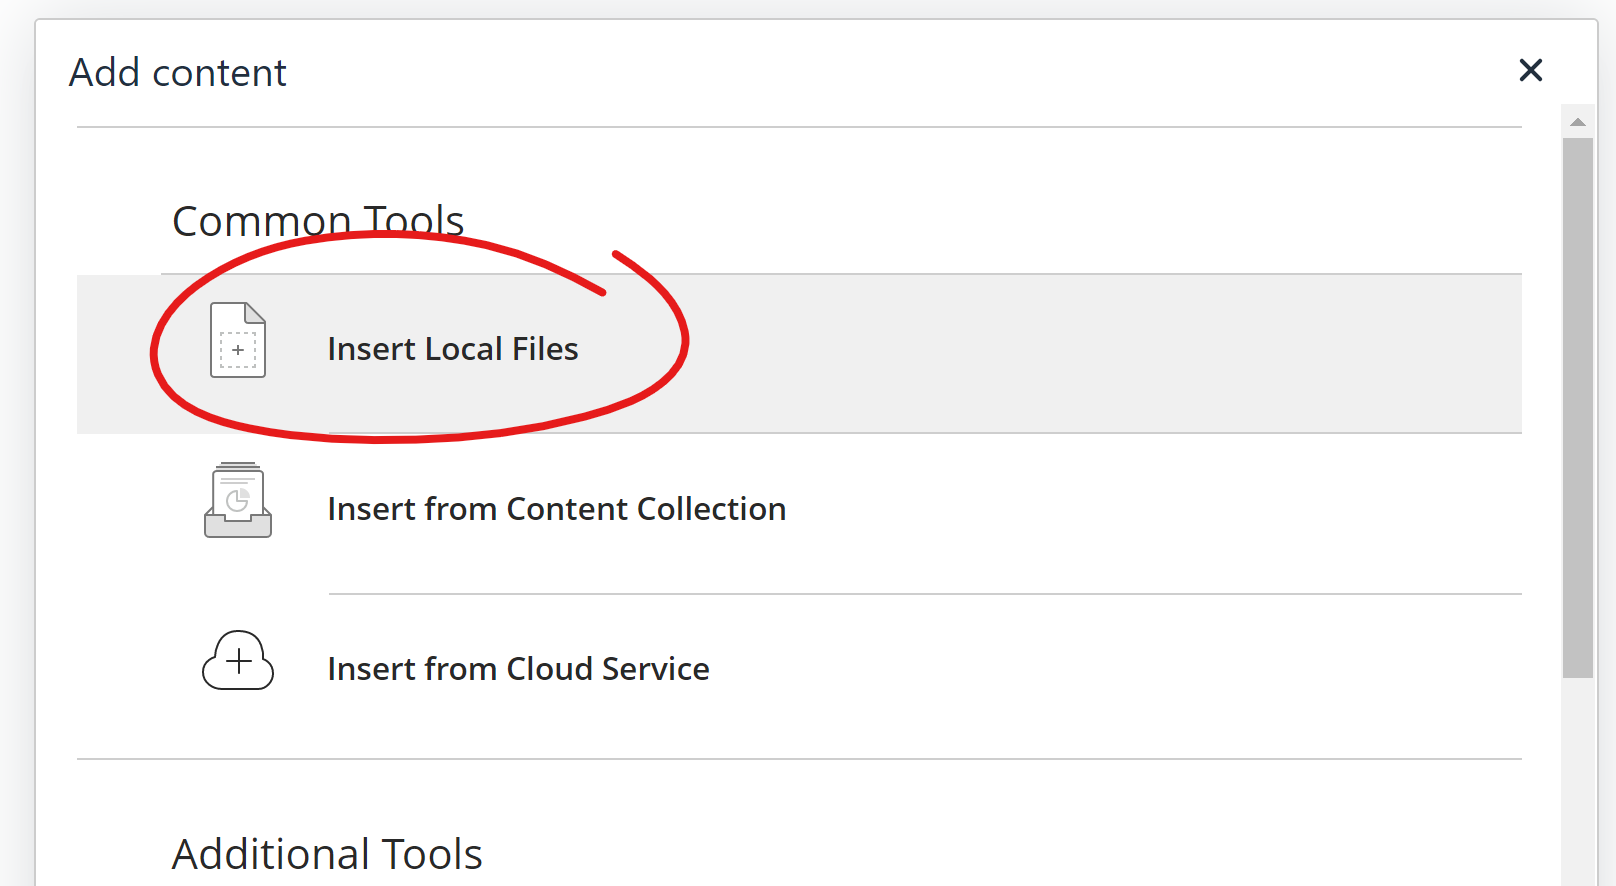 add content menu, common tools section, insert local files highlighted